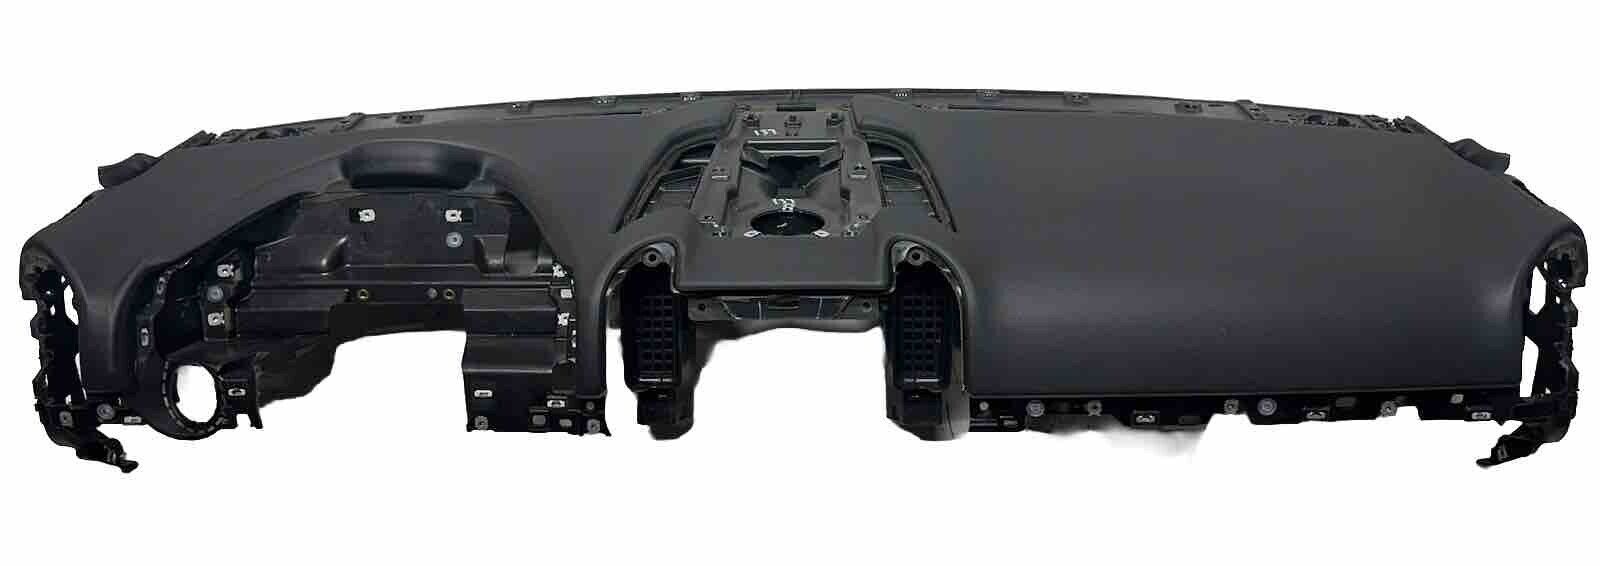 11-14 Porsche Cayenne Dashboard Dash Cover Panel Assembly Oem